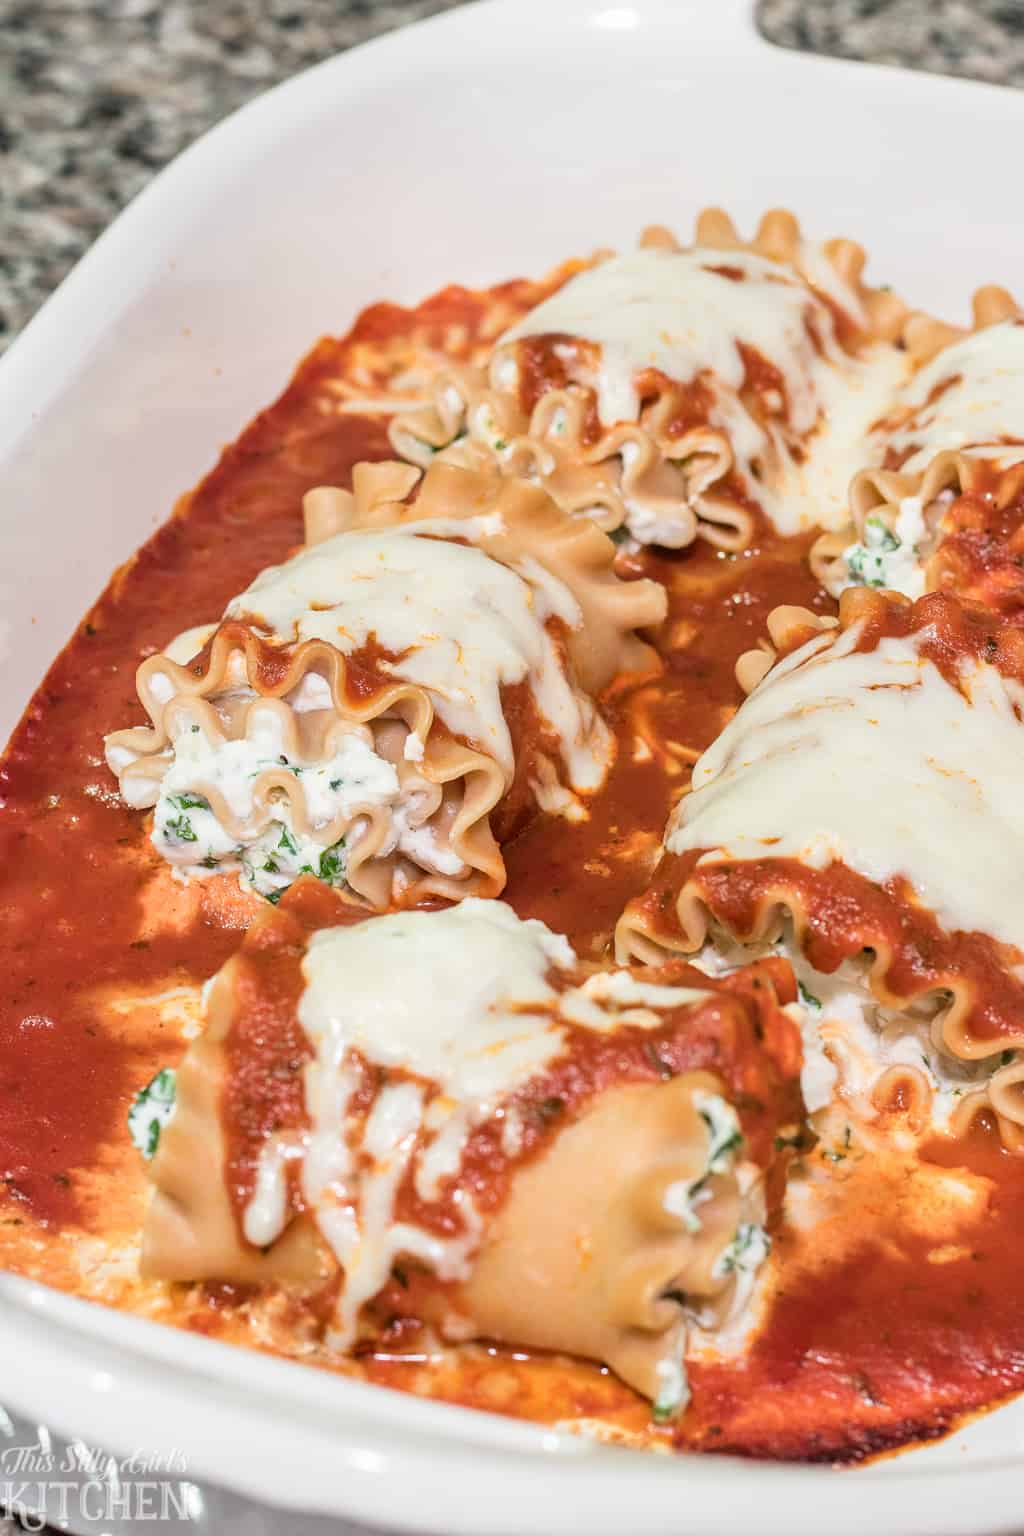 Skinny Lasagna Roll-Ups, little packages filled with ricotta cheese and sauteed kale, a lightened up recipe full of flavor! #Recipe from ThisSillyGirlsKitchen.com #lasagna #skinny #lasagnarolls